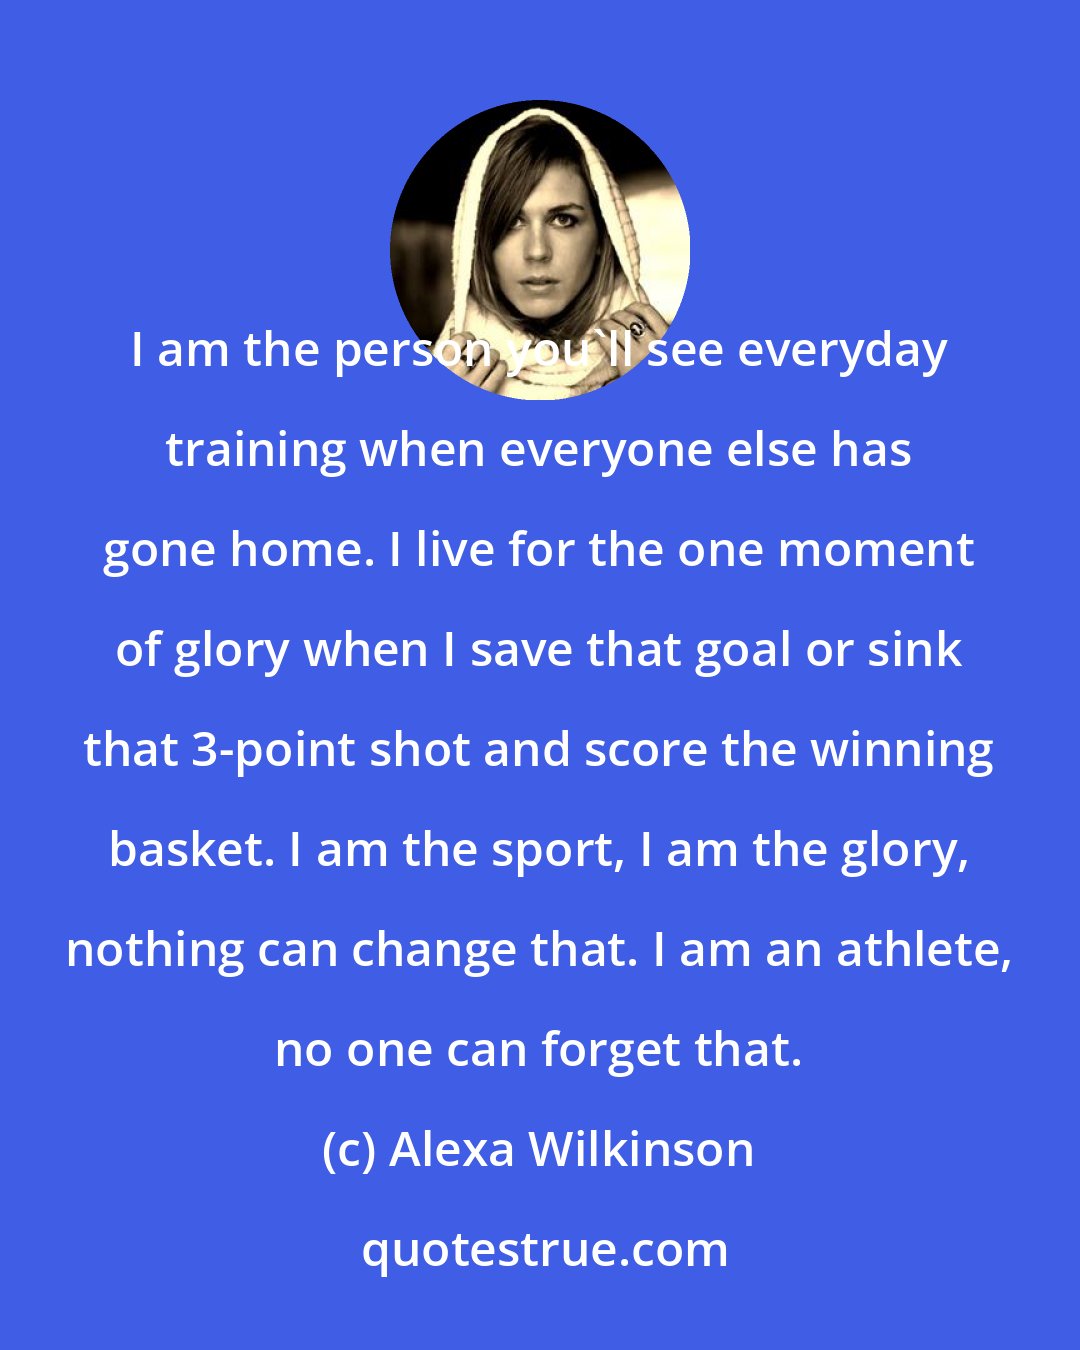 Alexa Wilkinson: I am the person you'll see everyday training when everyone else has gone home. I live for the one moment of glory when I save that goal or sink that 3-point shot and score the winning basket. I am the sport, I am the glory, nothing can change that. I am an athlete, no one can forget that.